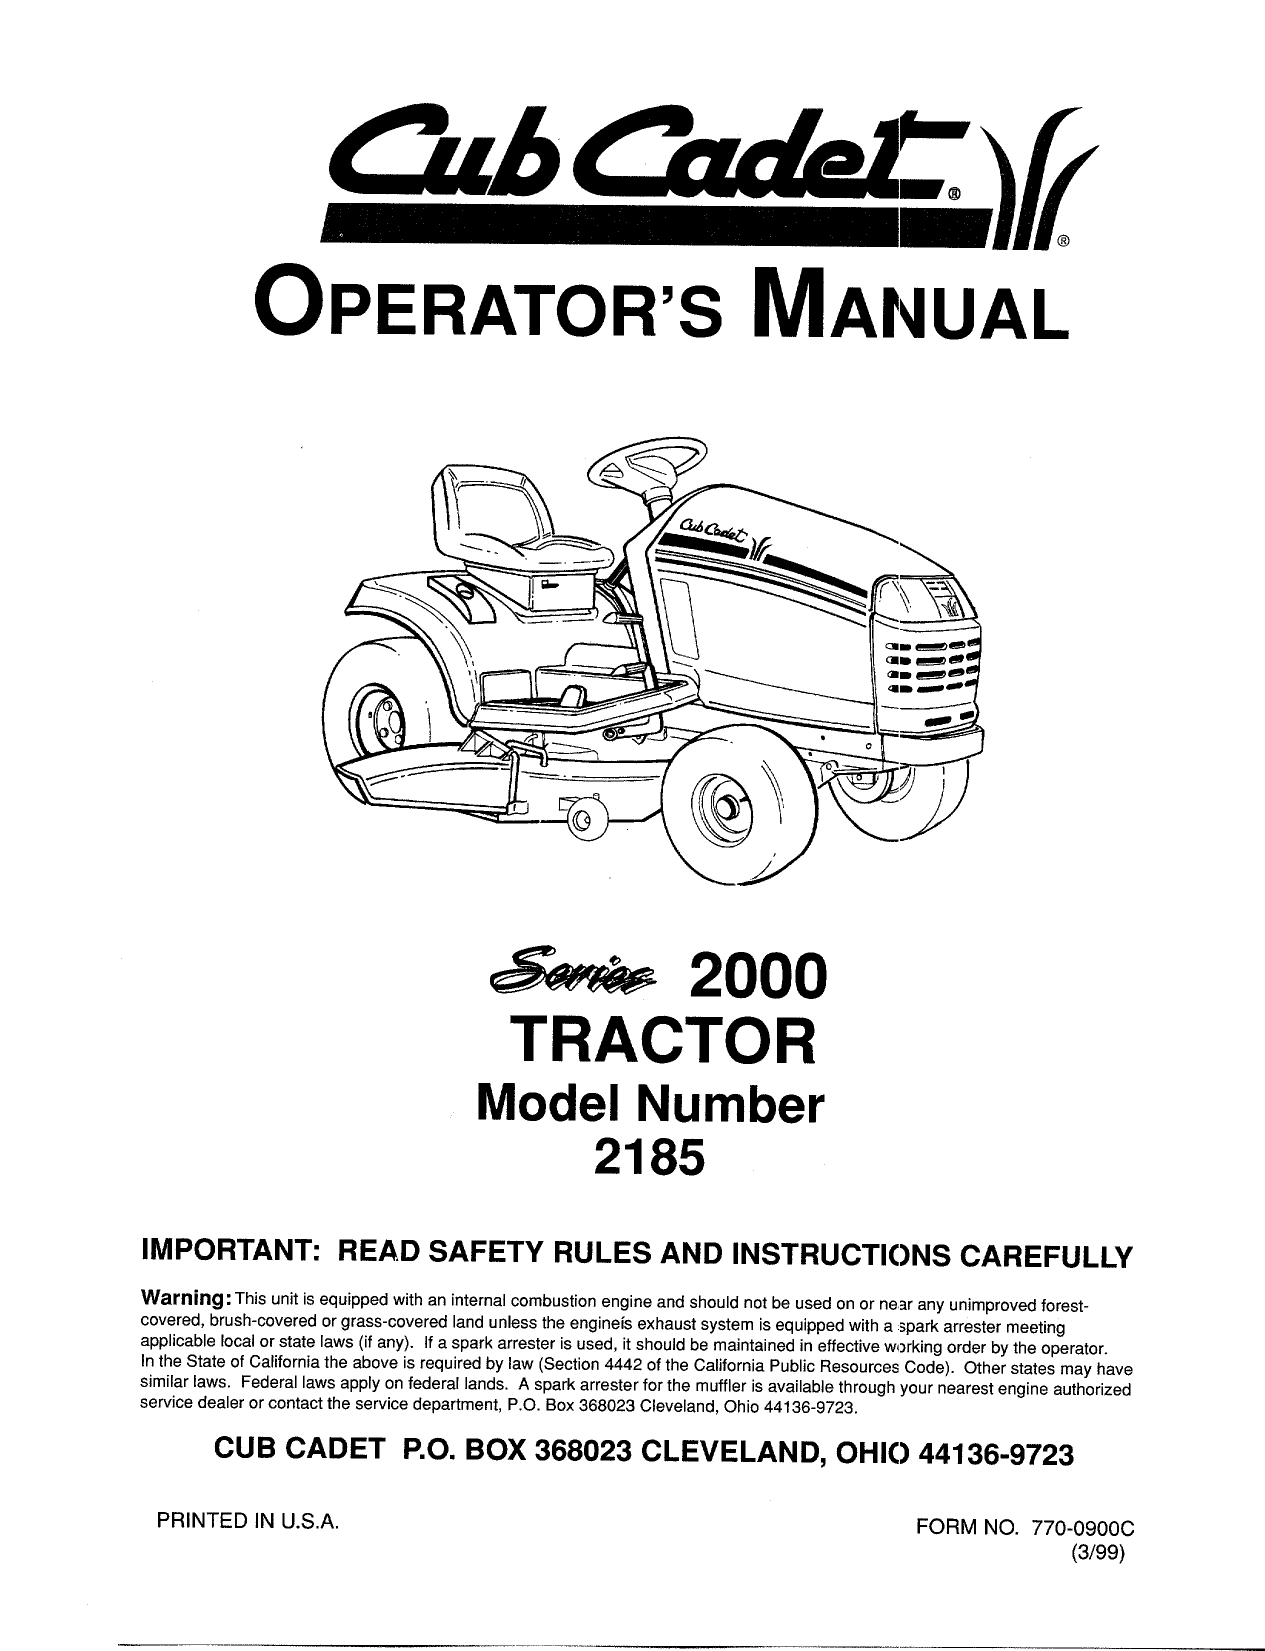 1994-1999 MTD Cub Cadet™ 2130, 2135, 2140, 2145, 2160, 2165, 2185 lawn tractor 190-300, 190-301, 190-314, 190-315, 190-302, 190-303 and 190-304 mower deck operator´s manual Preview image 1